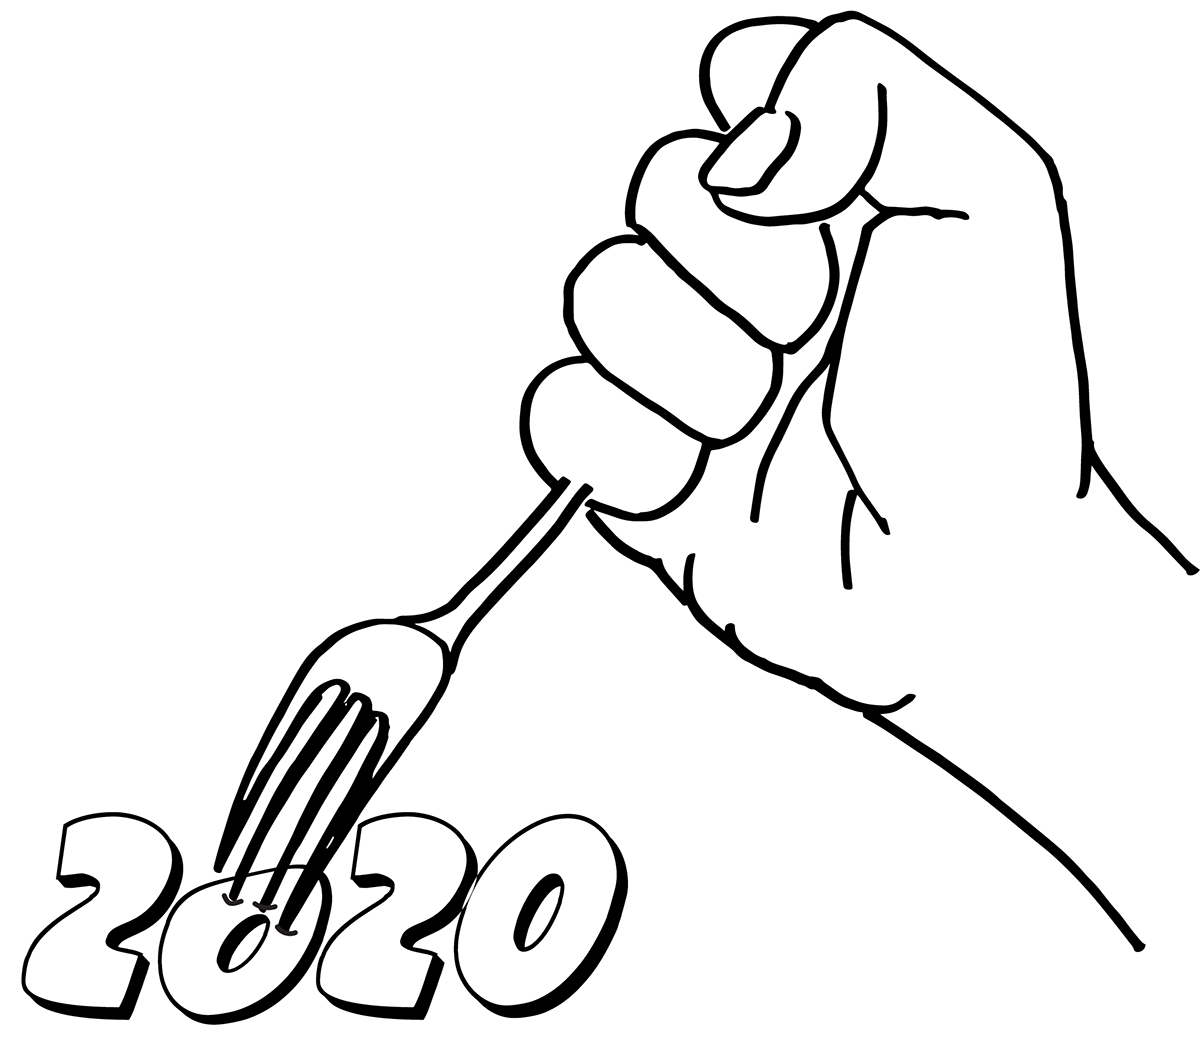 STICK 2020 WITH A FORK